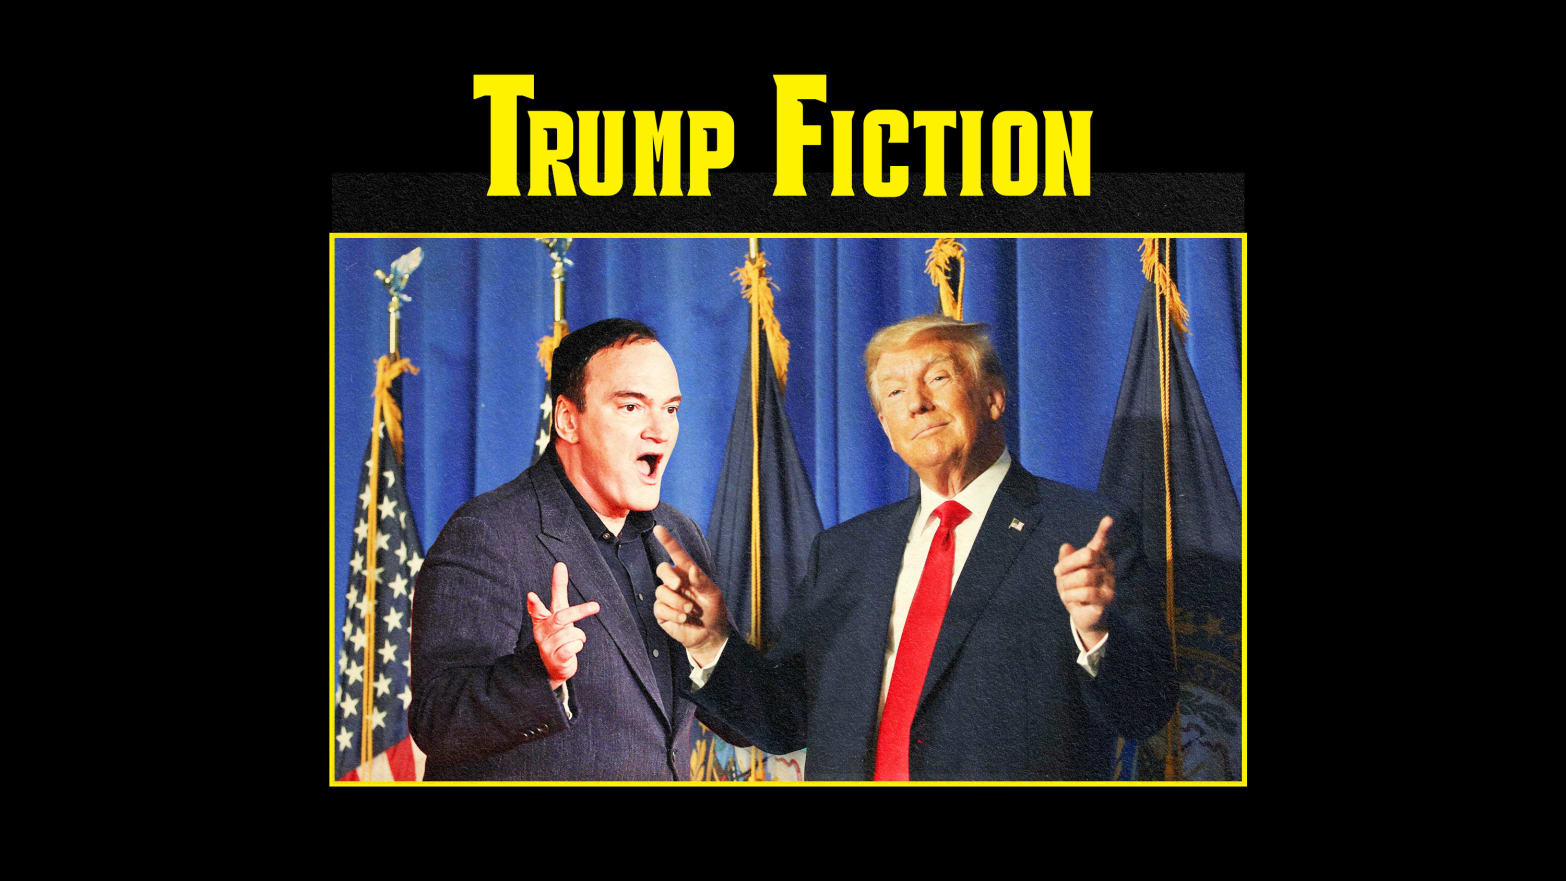 A photo illustration recreating the Pulp Fiction poster with Donald Trump and Quentin Tarantino